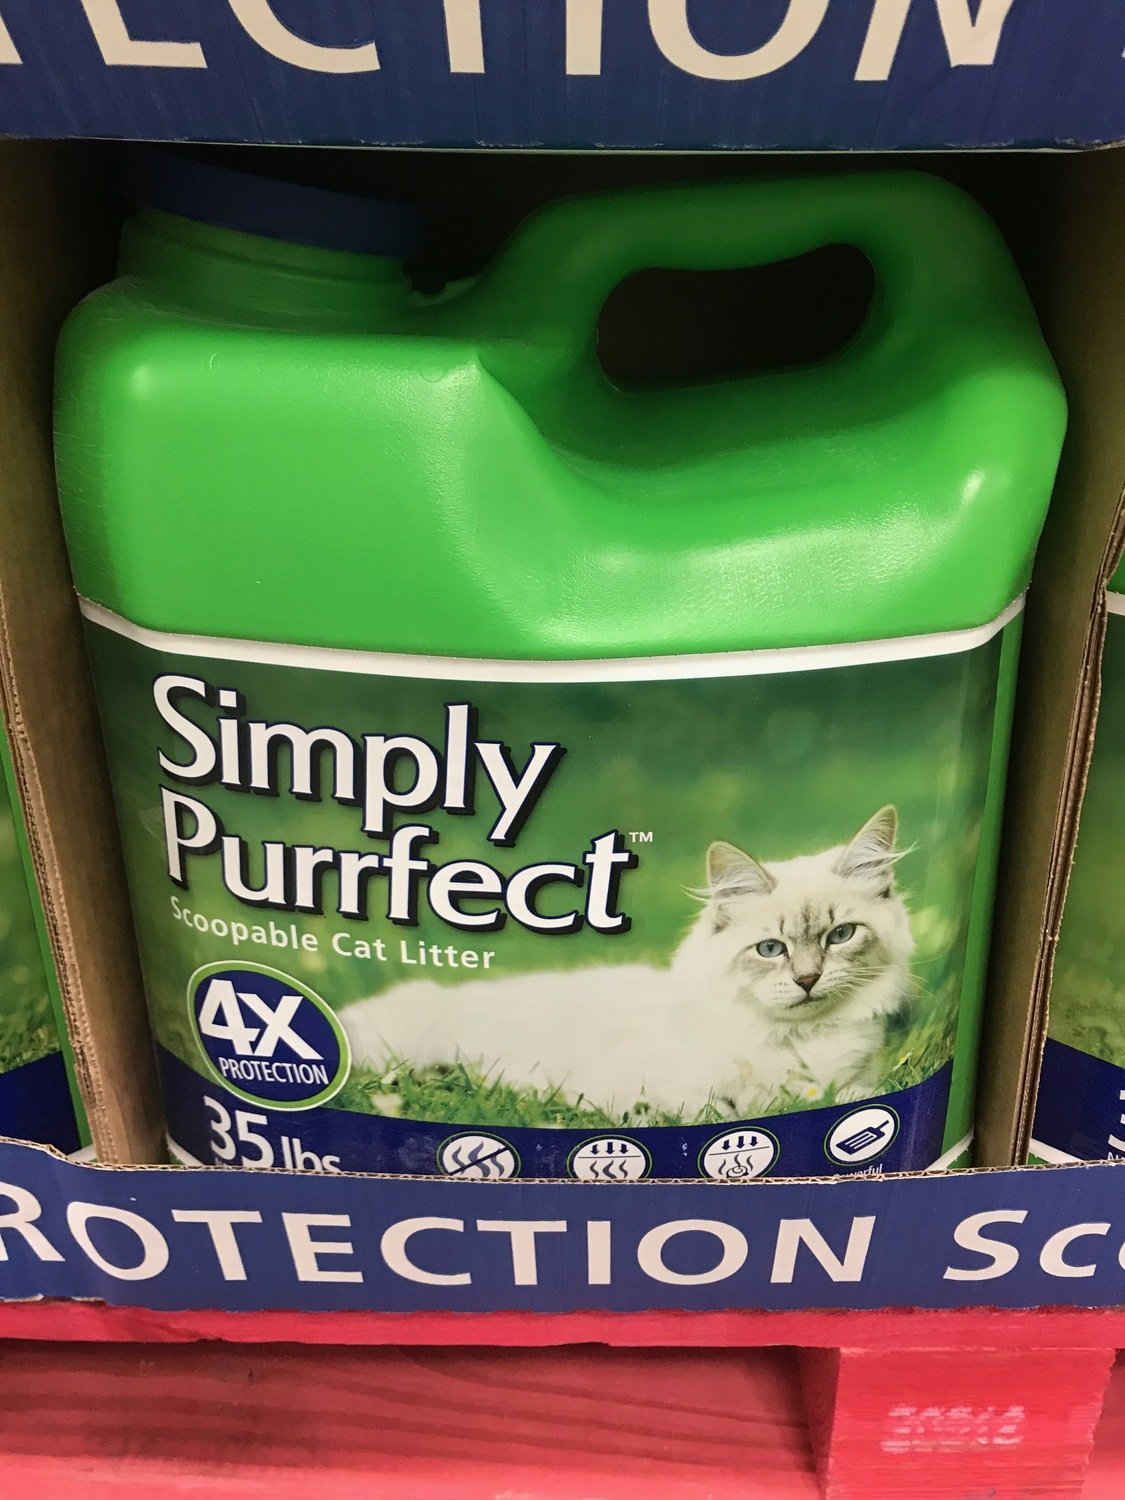 Simply Purrfect Scoopable Cat Litter 35 lb